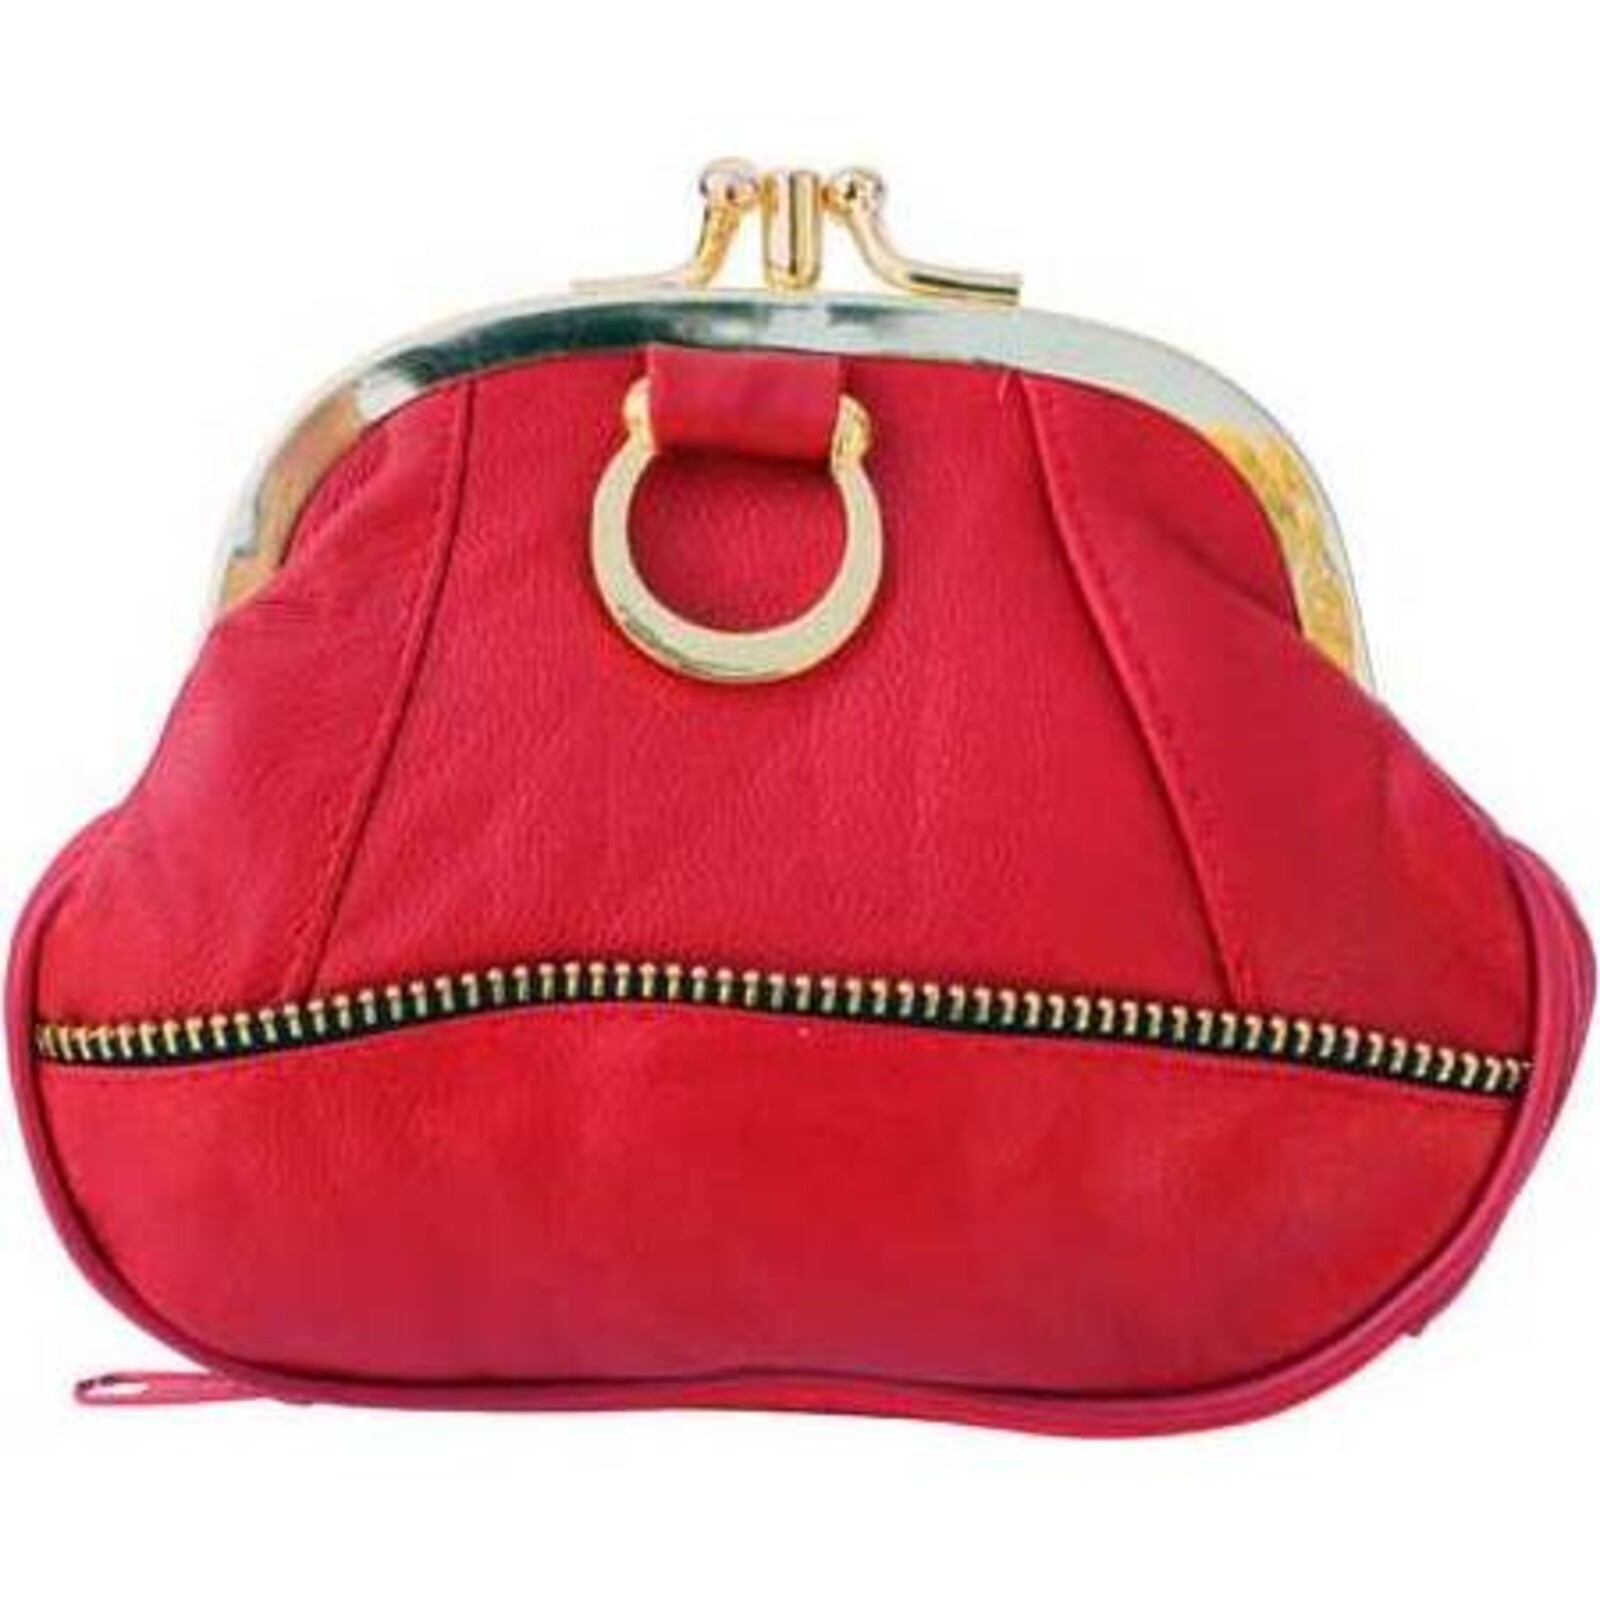 Leather Purse - Red Round